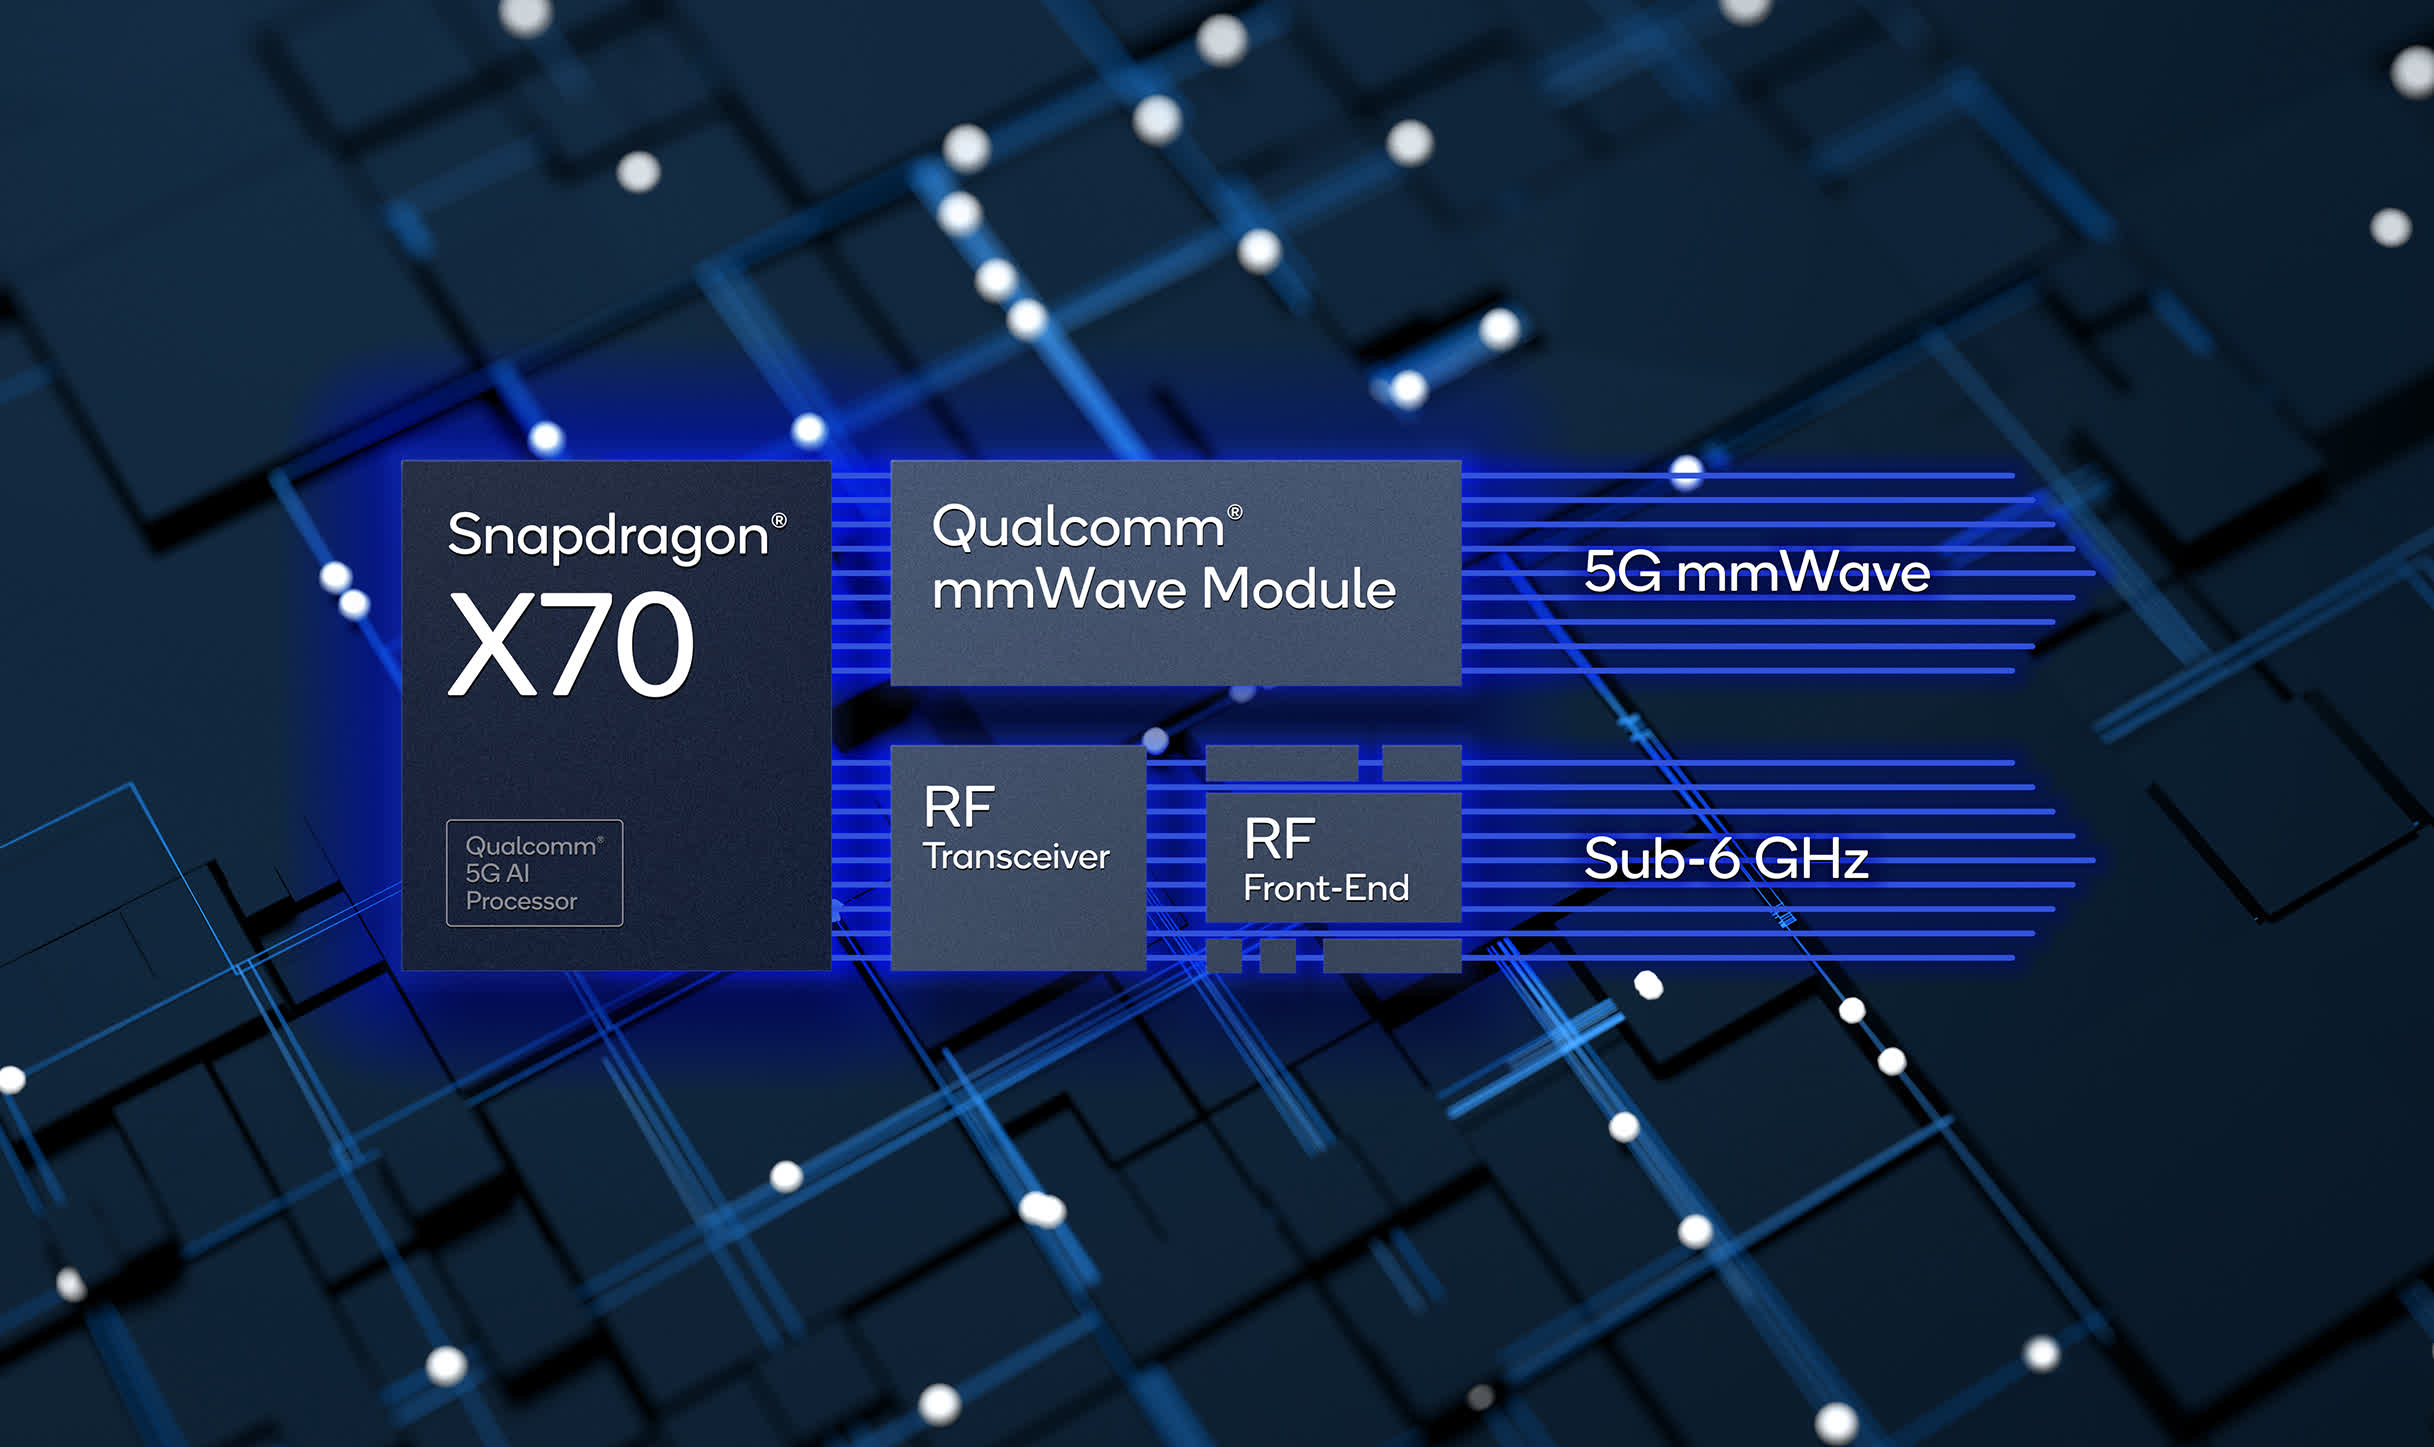 Snapdragon X70 5G modem packs an AI processor to improve signal strength and power efficiency